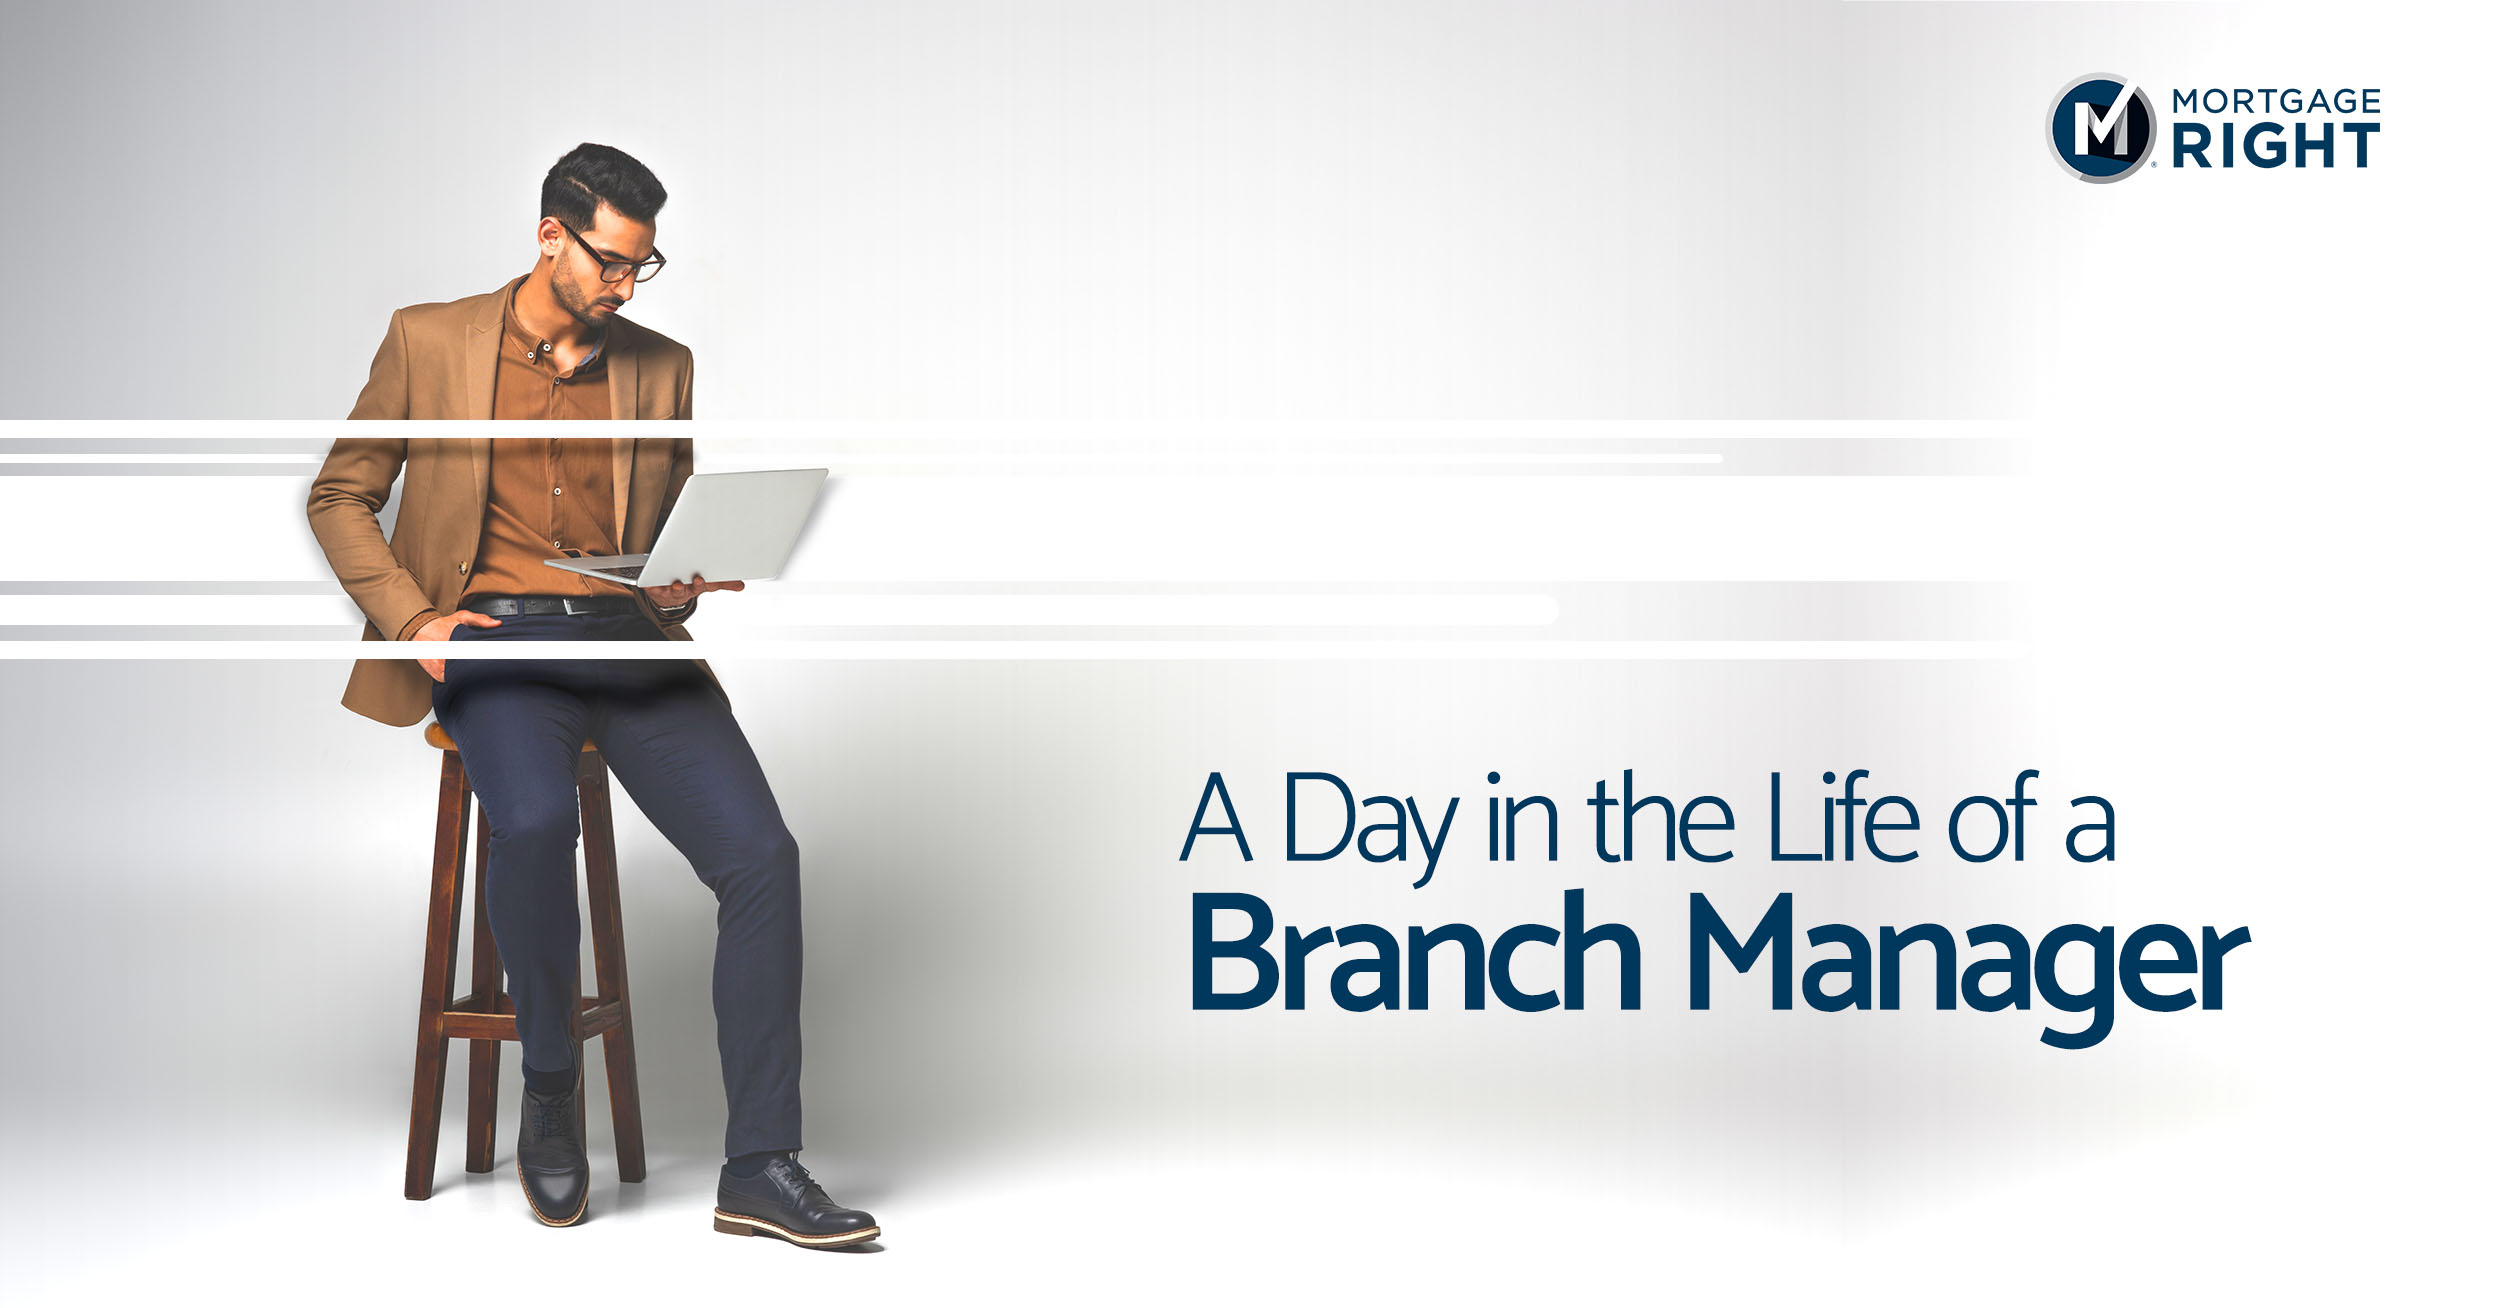 A day in the life of a mortgage branch manager